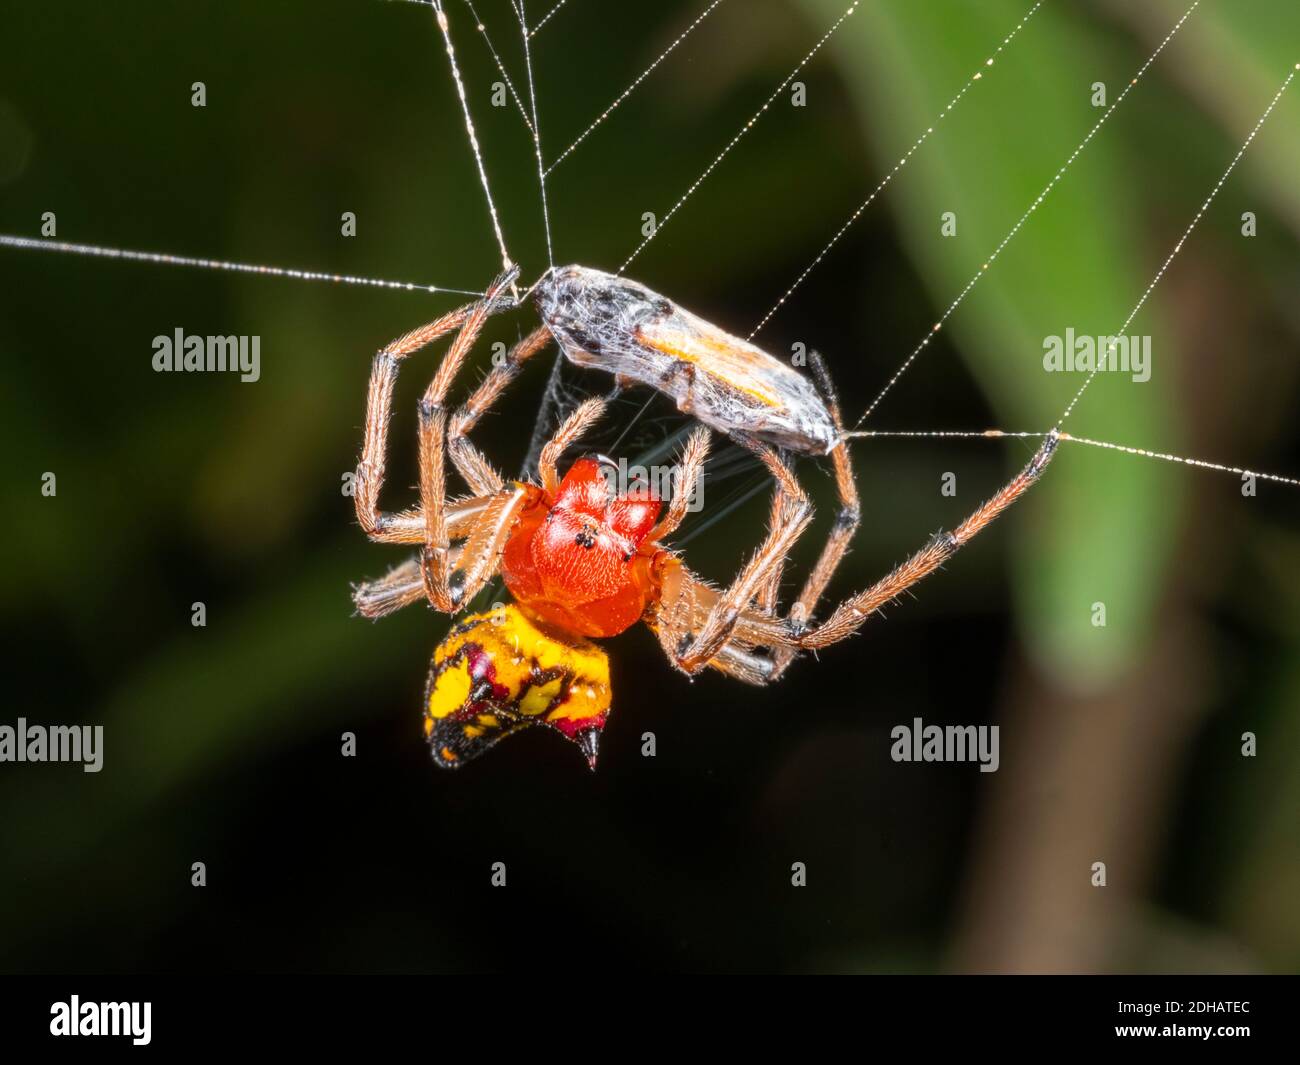 Spider wrapping its prey in silk to subdue its prey prior to feeding.  Yasuni National Park, Ecuador, December 2018 Stock Photo - Alamy